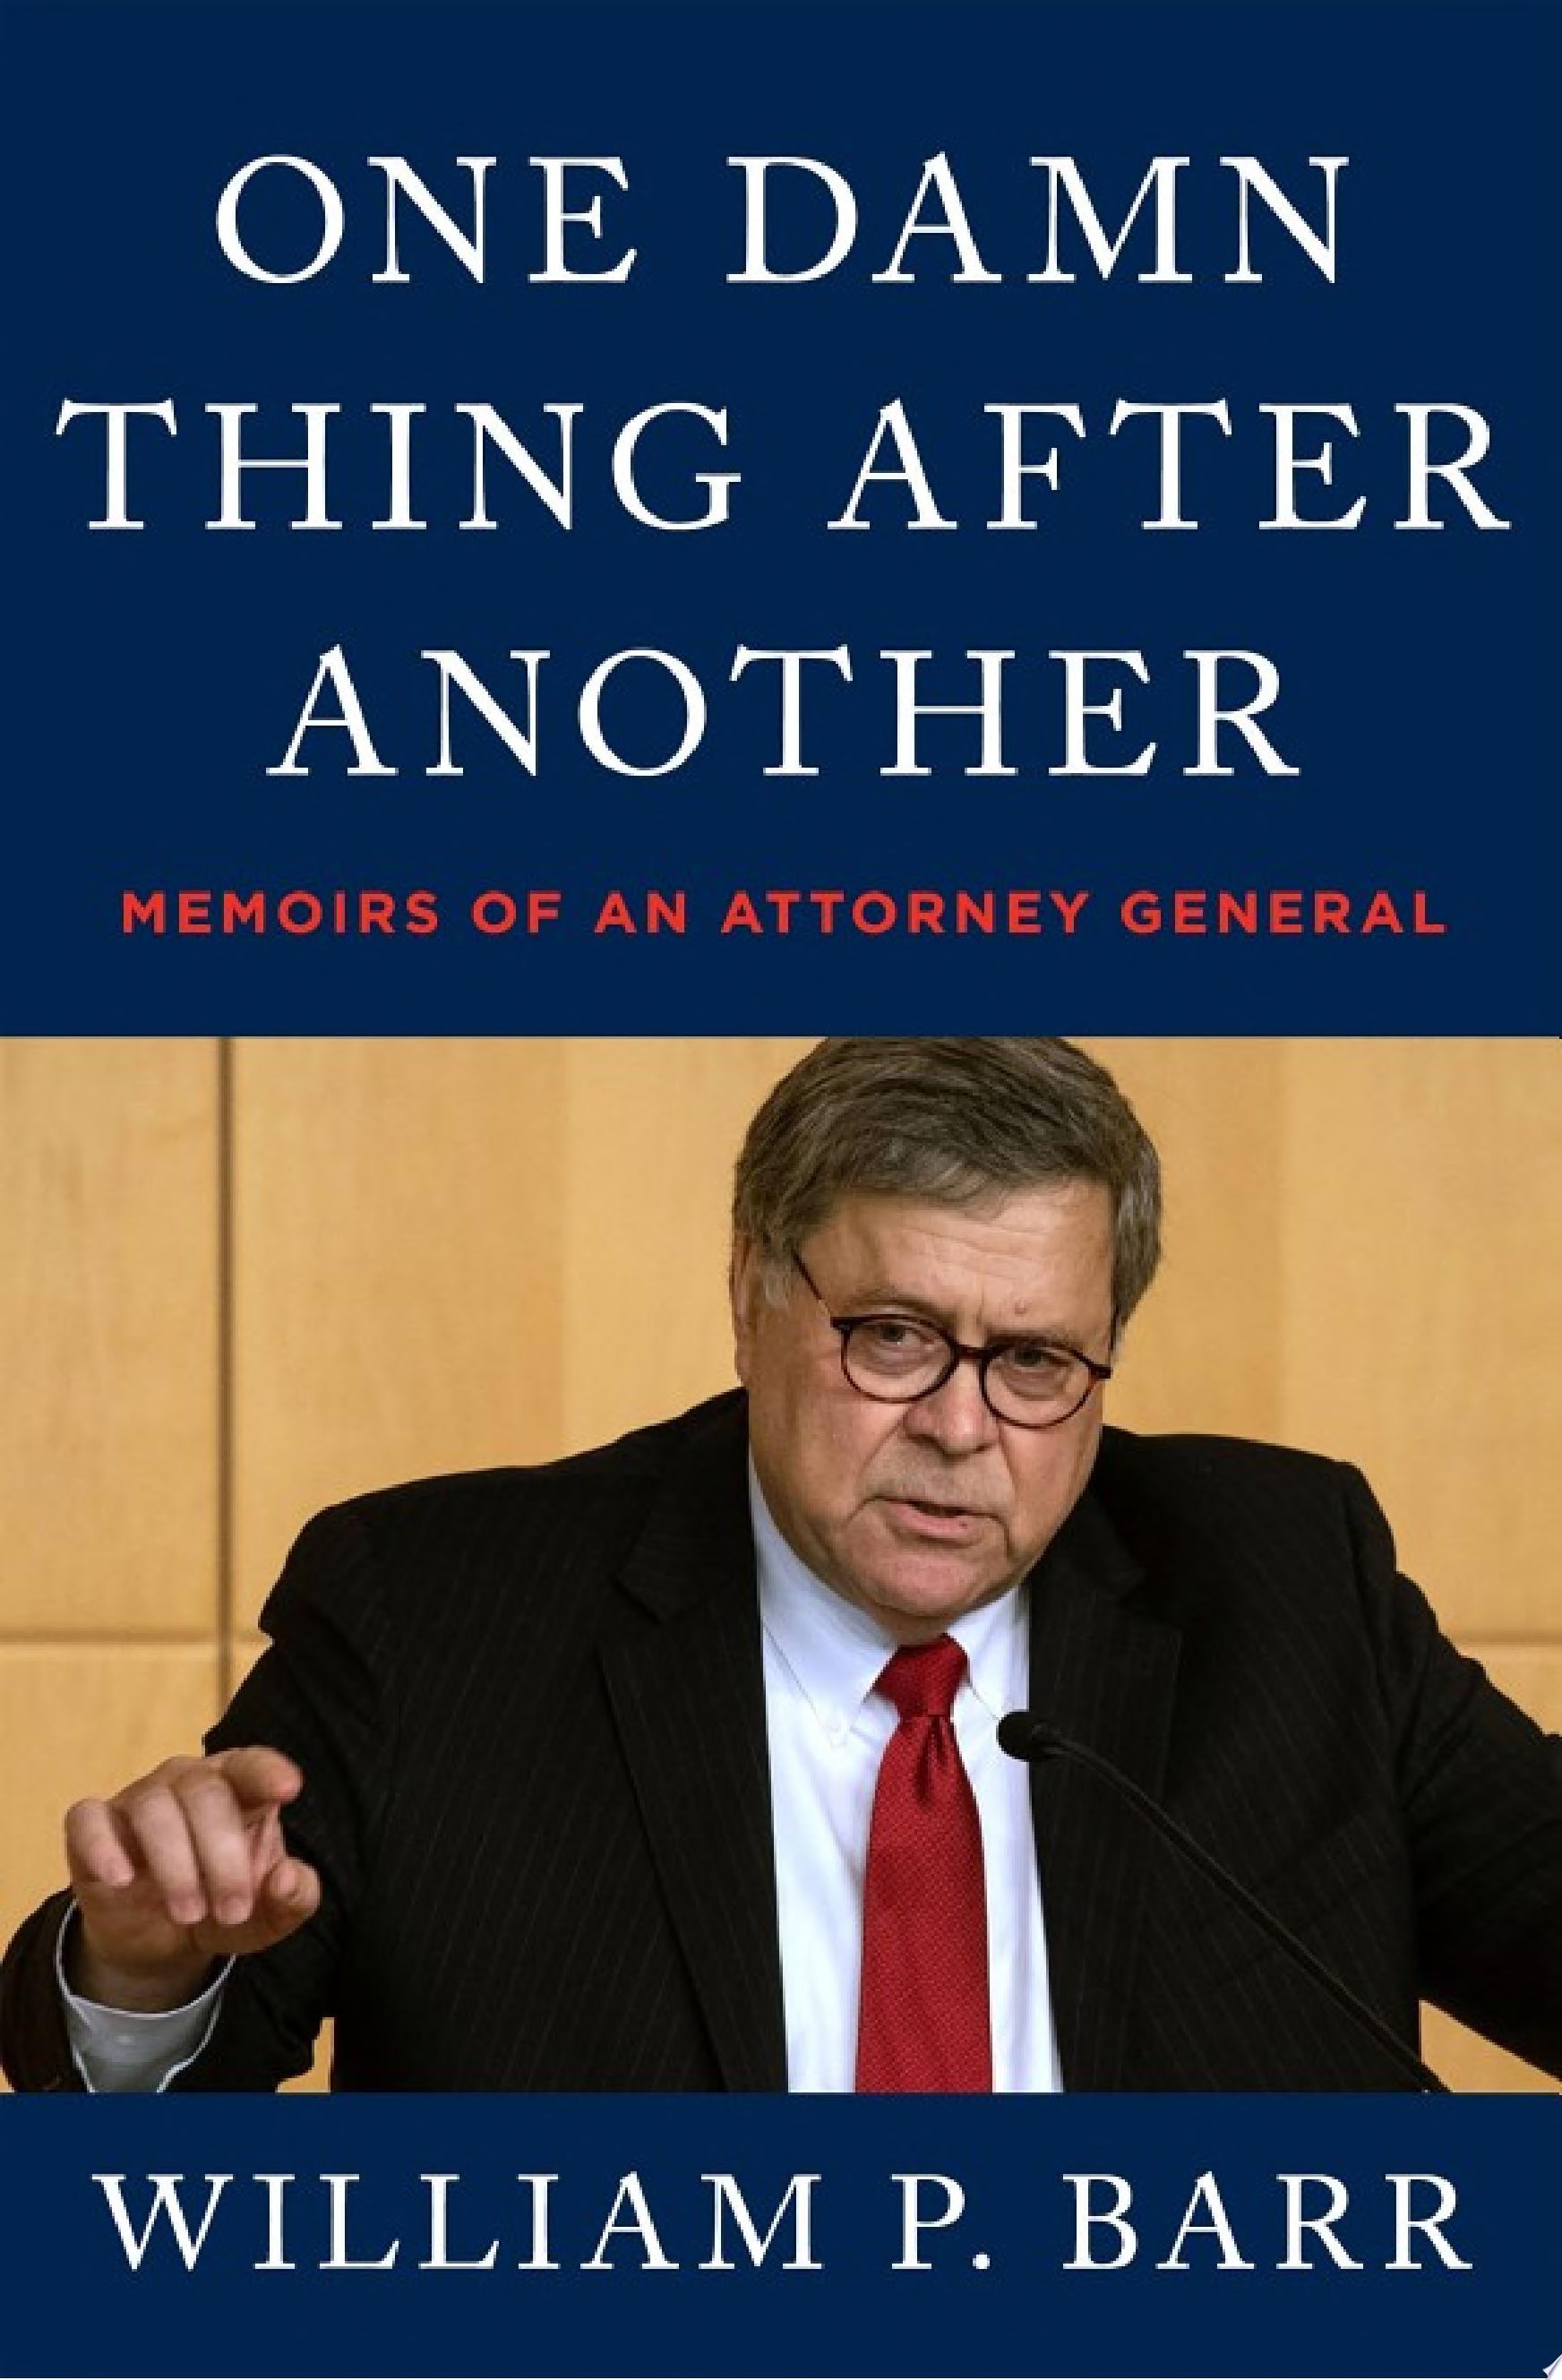 Image for "One Damn Thing After Another"